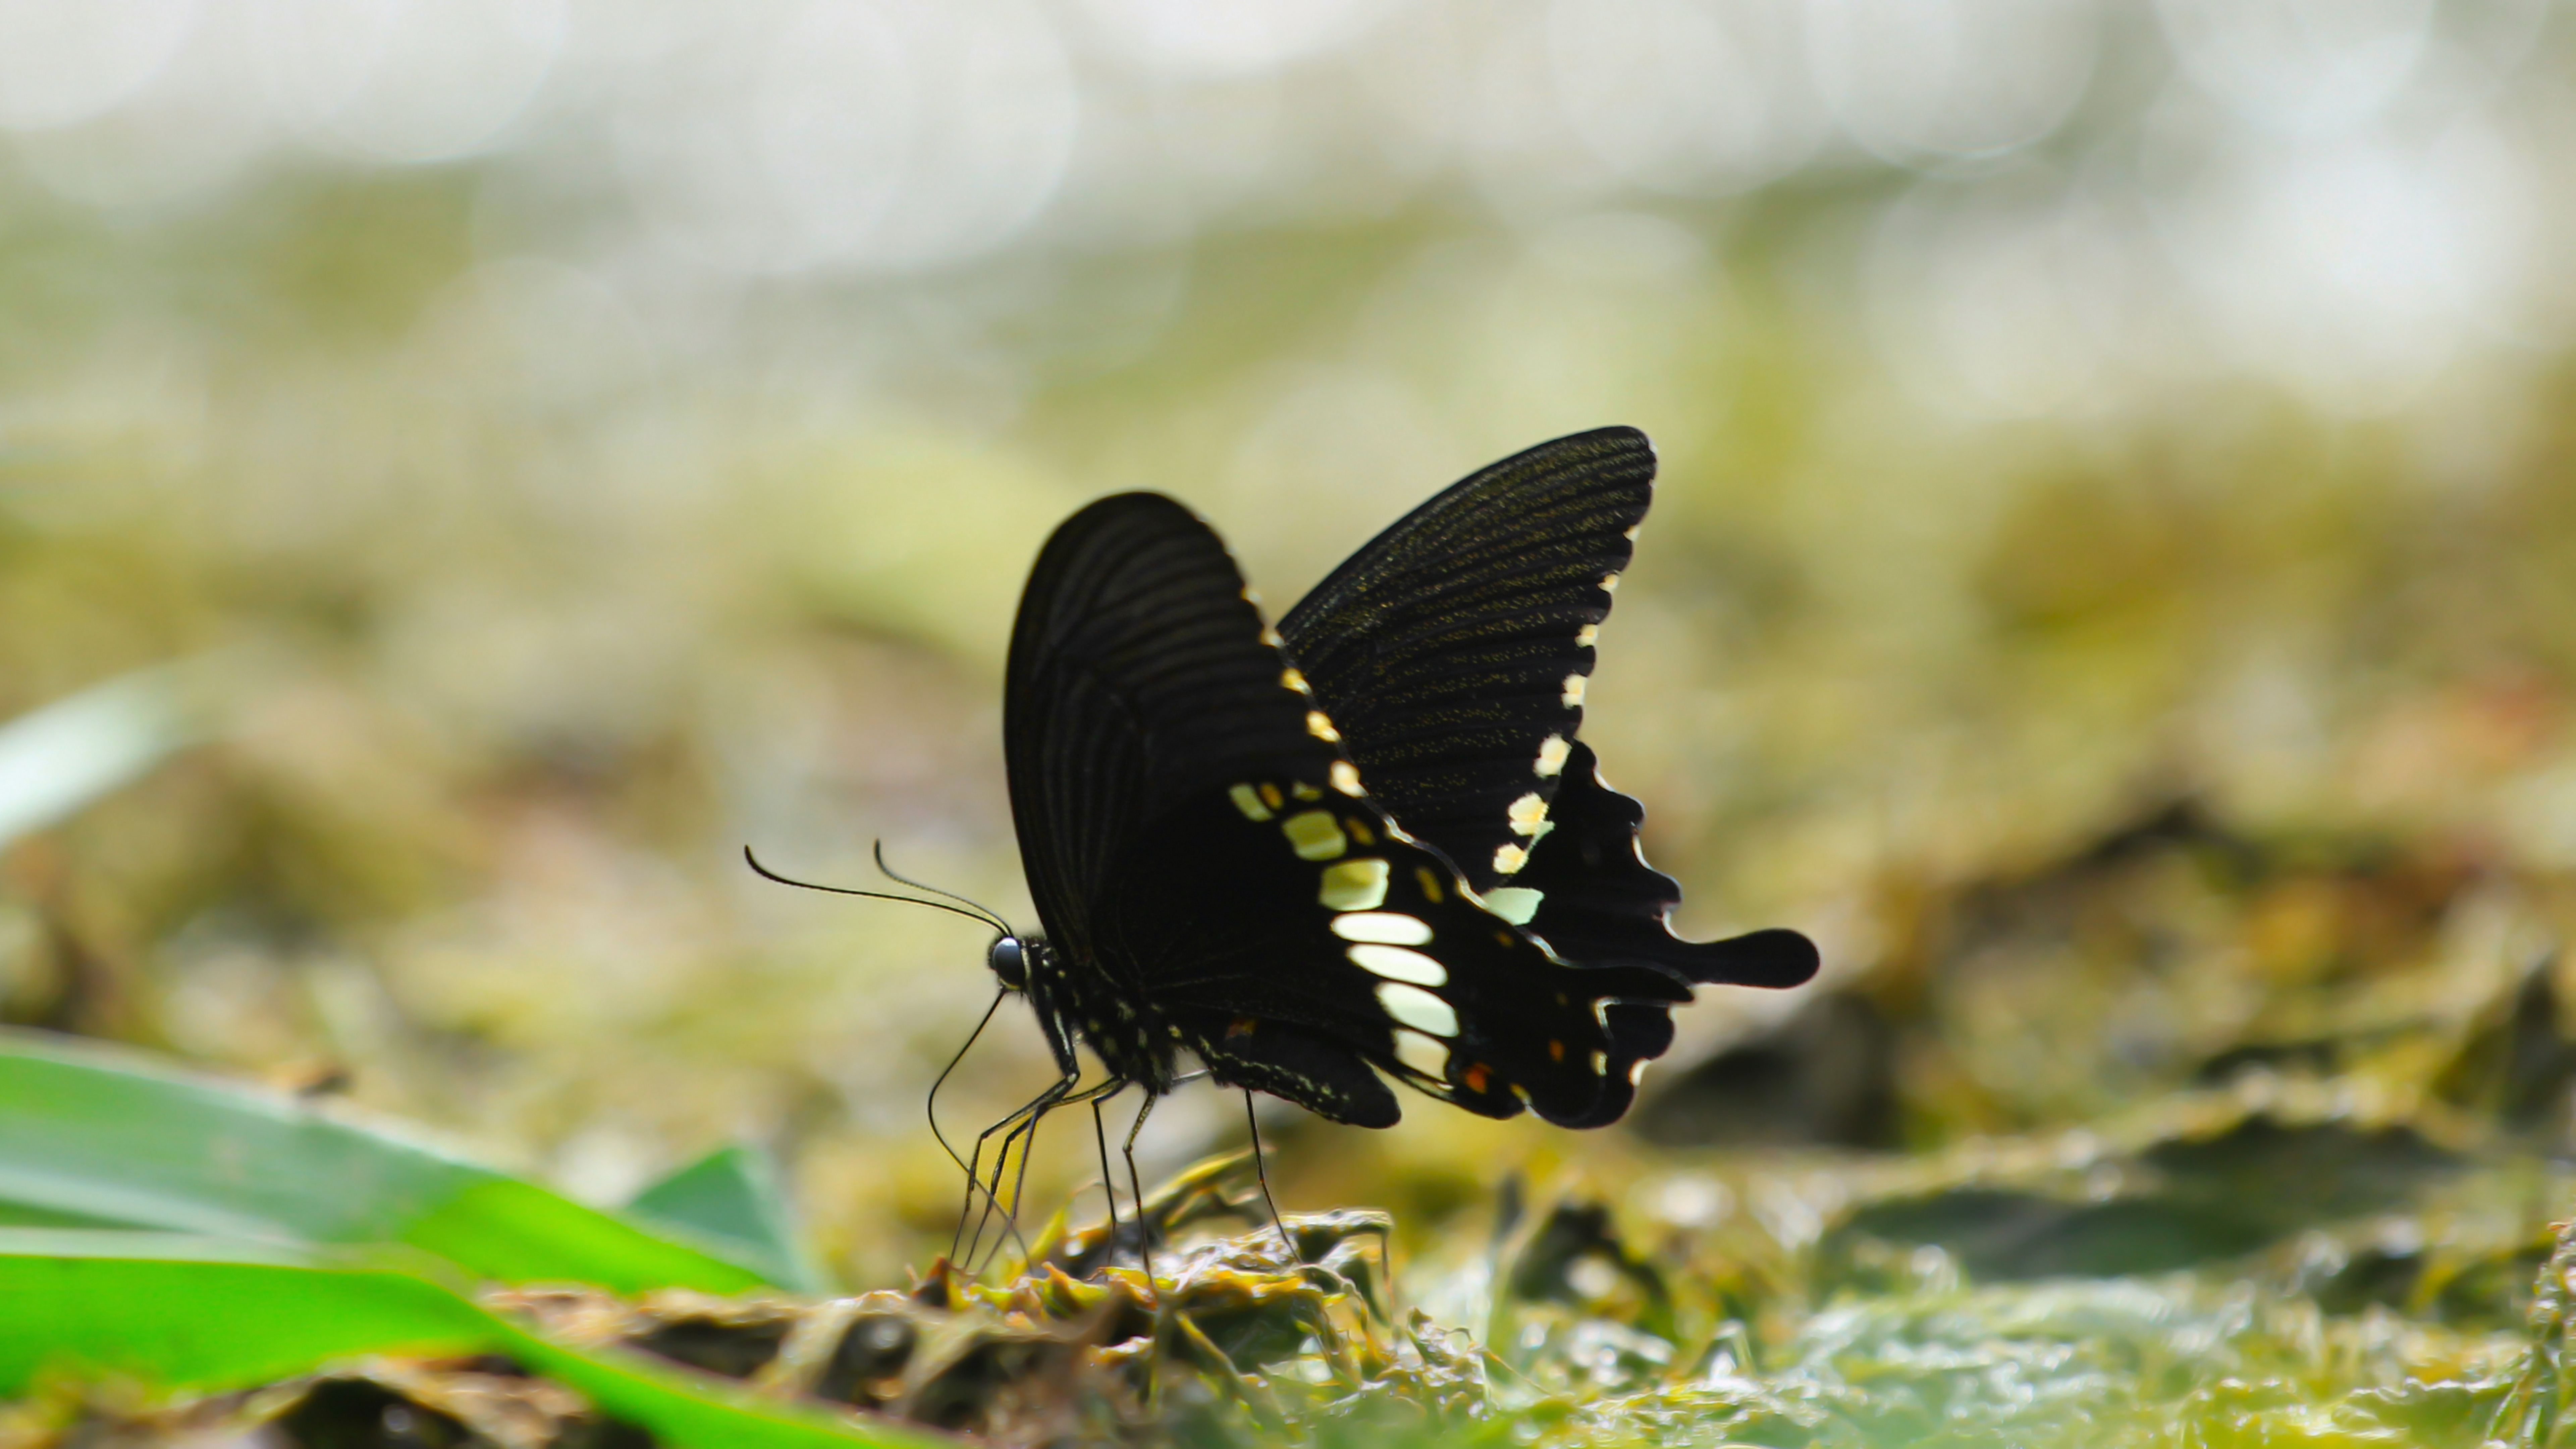 Black and White Butterfly on Green Grass During Daytime. Wallpaper in 7680x4320 Resolution